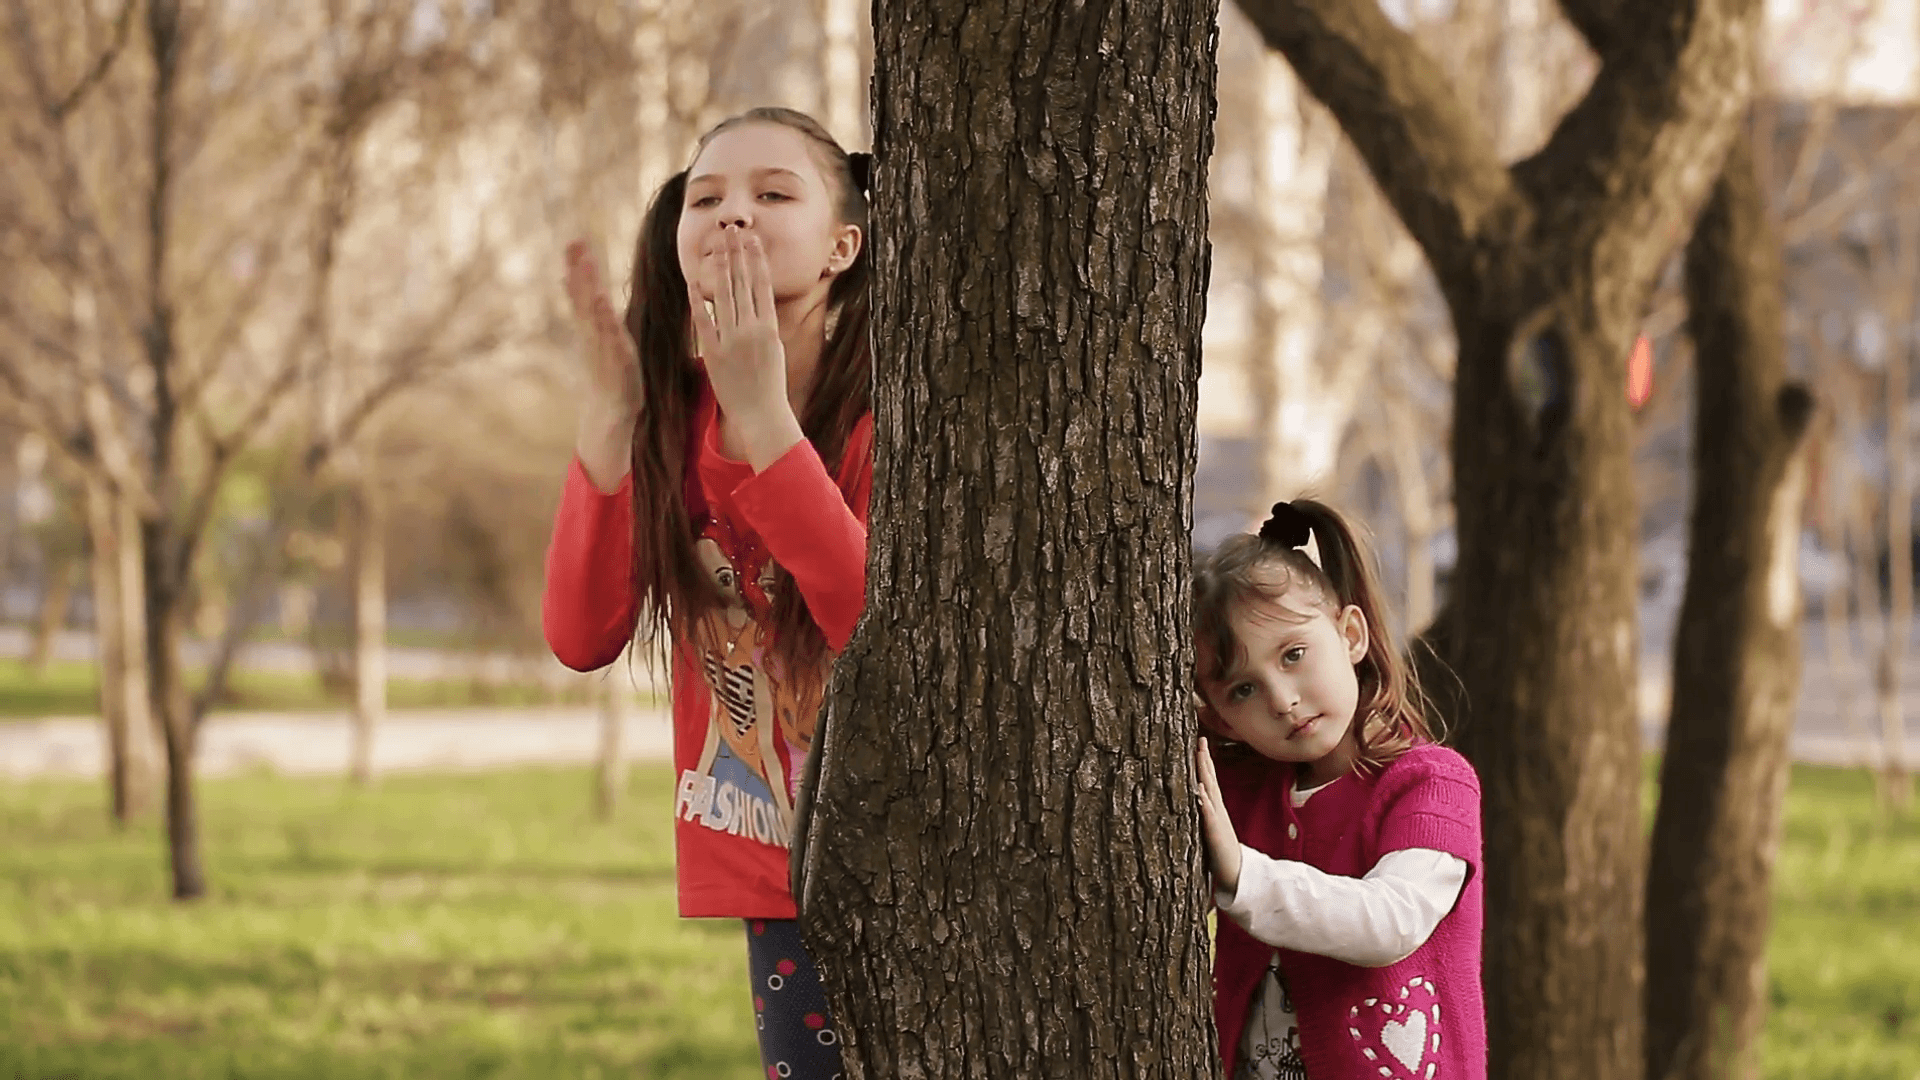 Cheerful girl playing hide and seek behind a tree